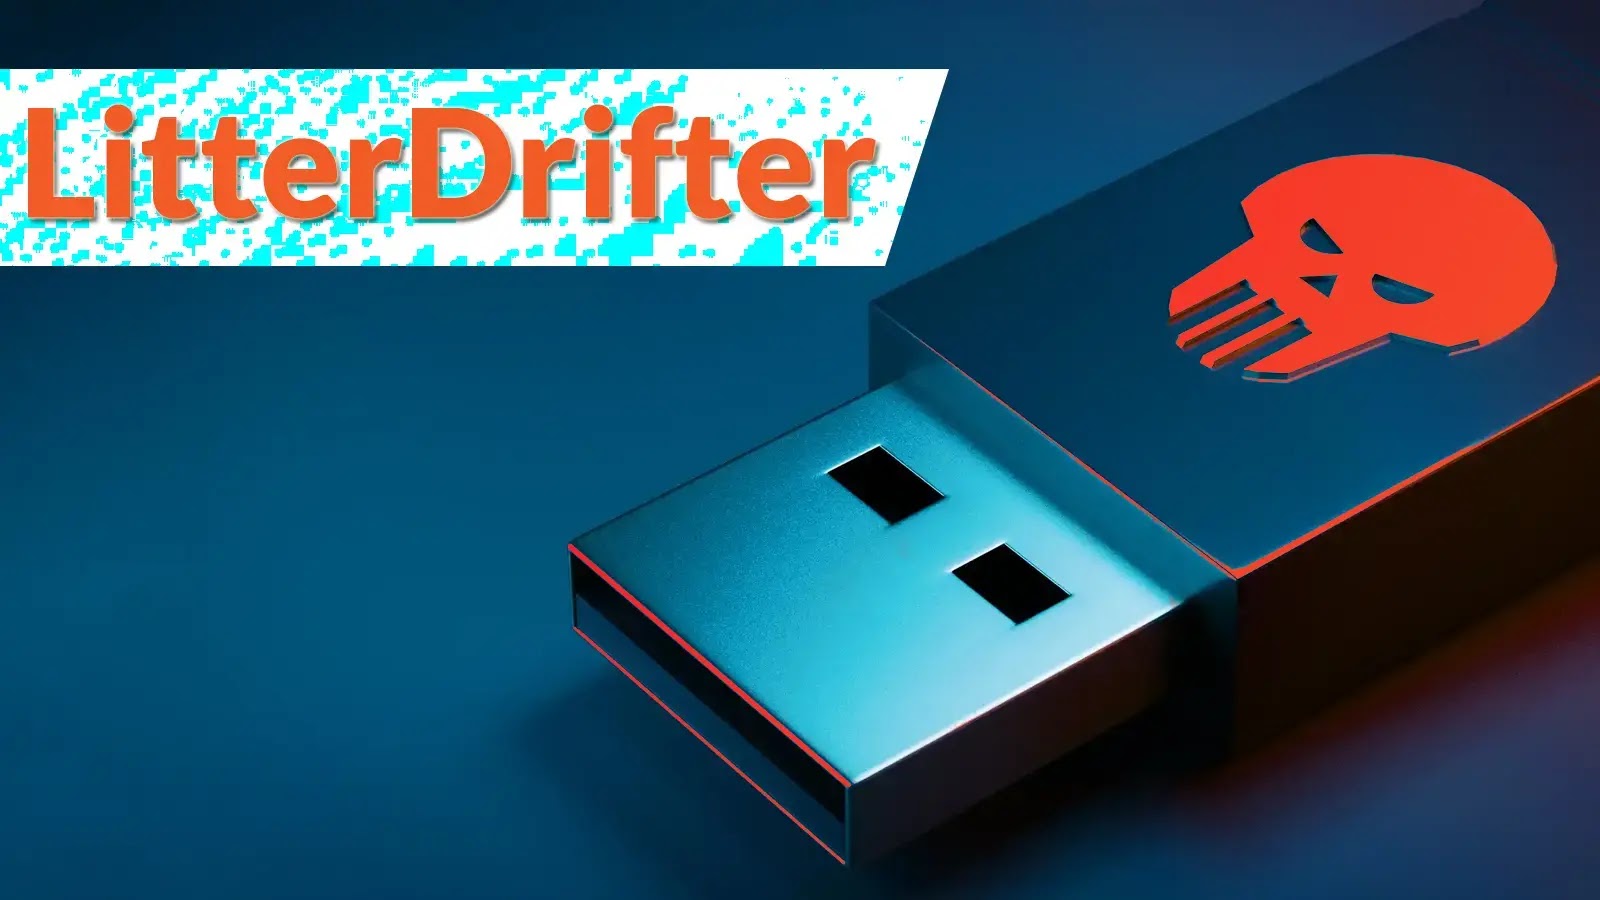 LitterDrifter Powershell Worm Rapidly Spreads on USB Drives by Itself